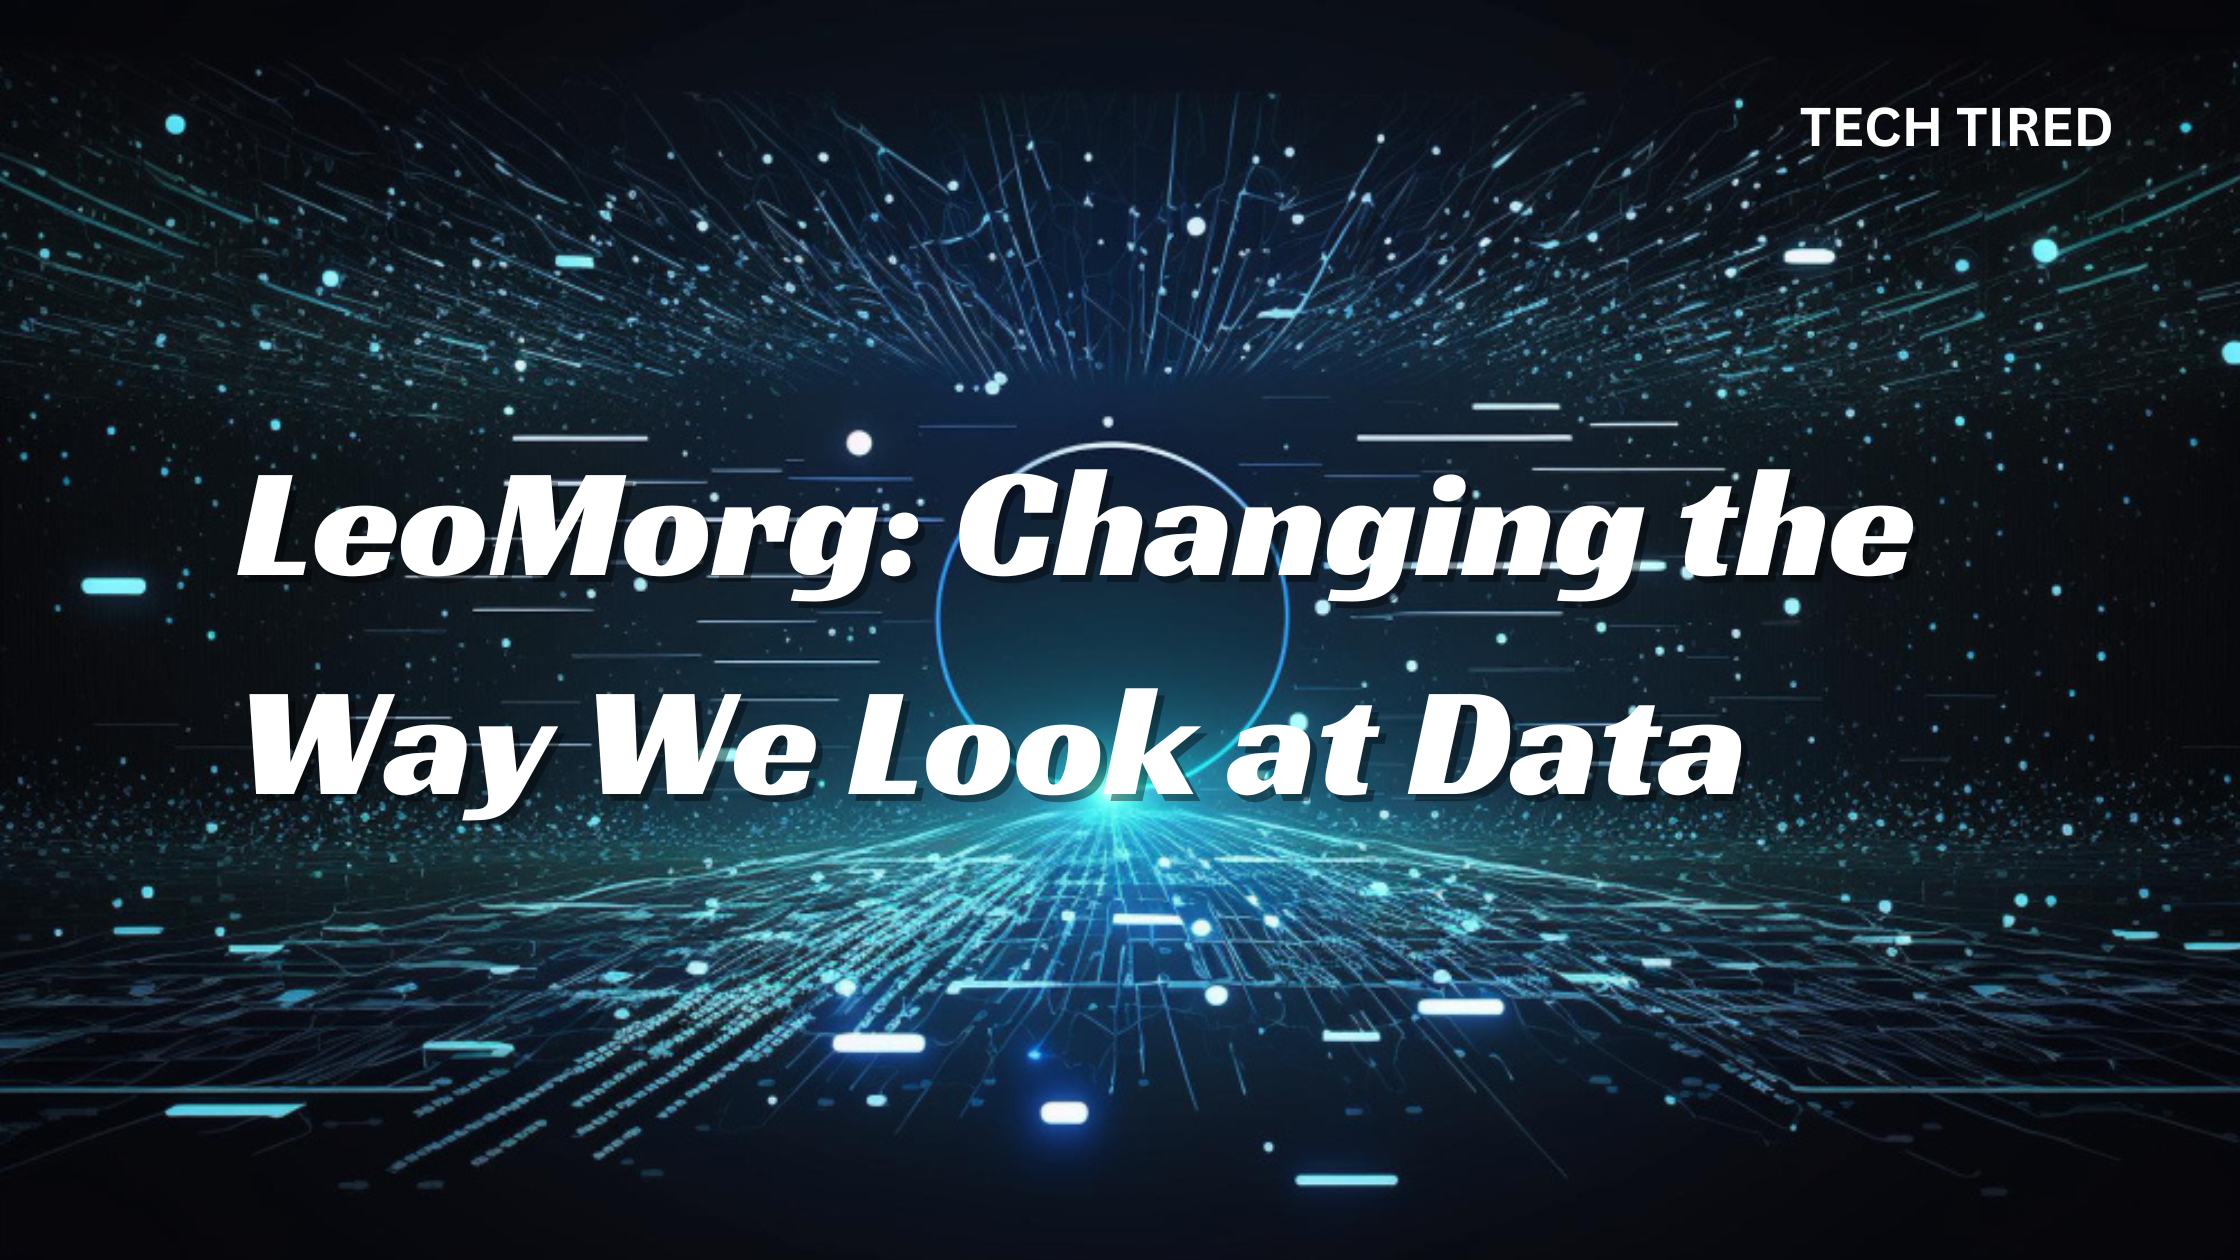 LeoMorg: Changing the Way We Look at Data